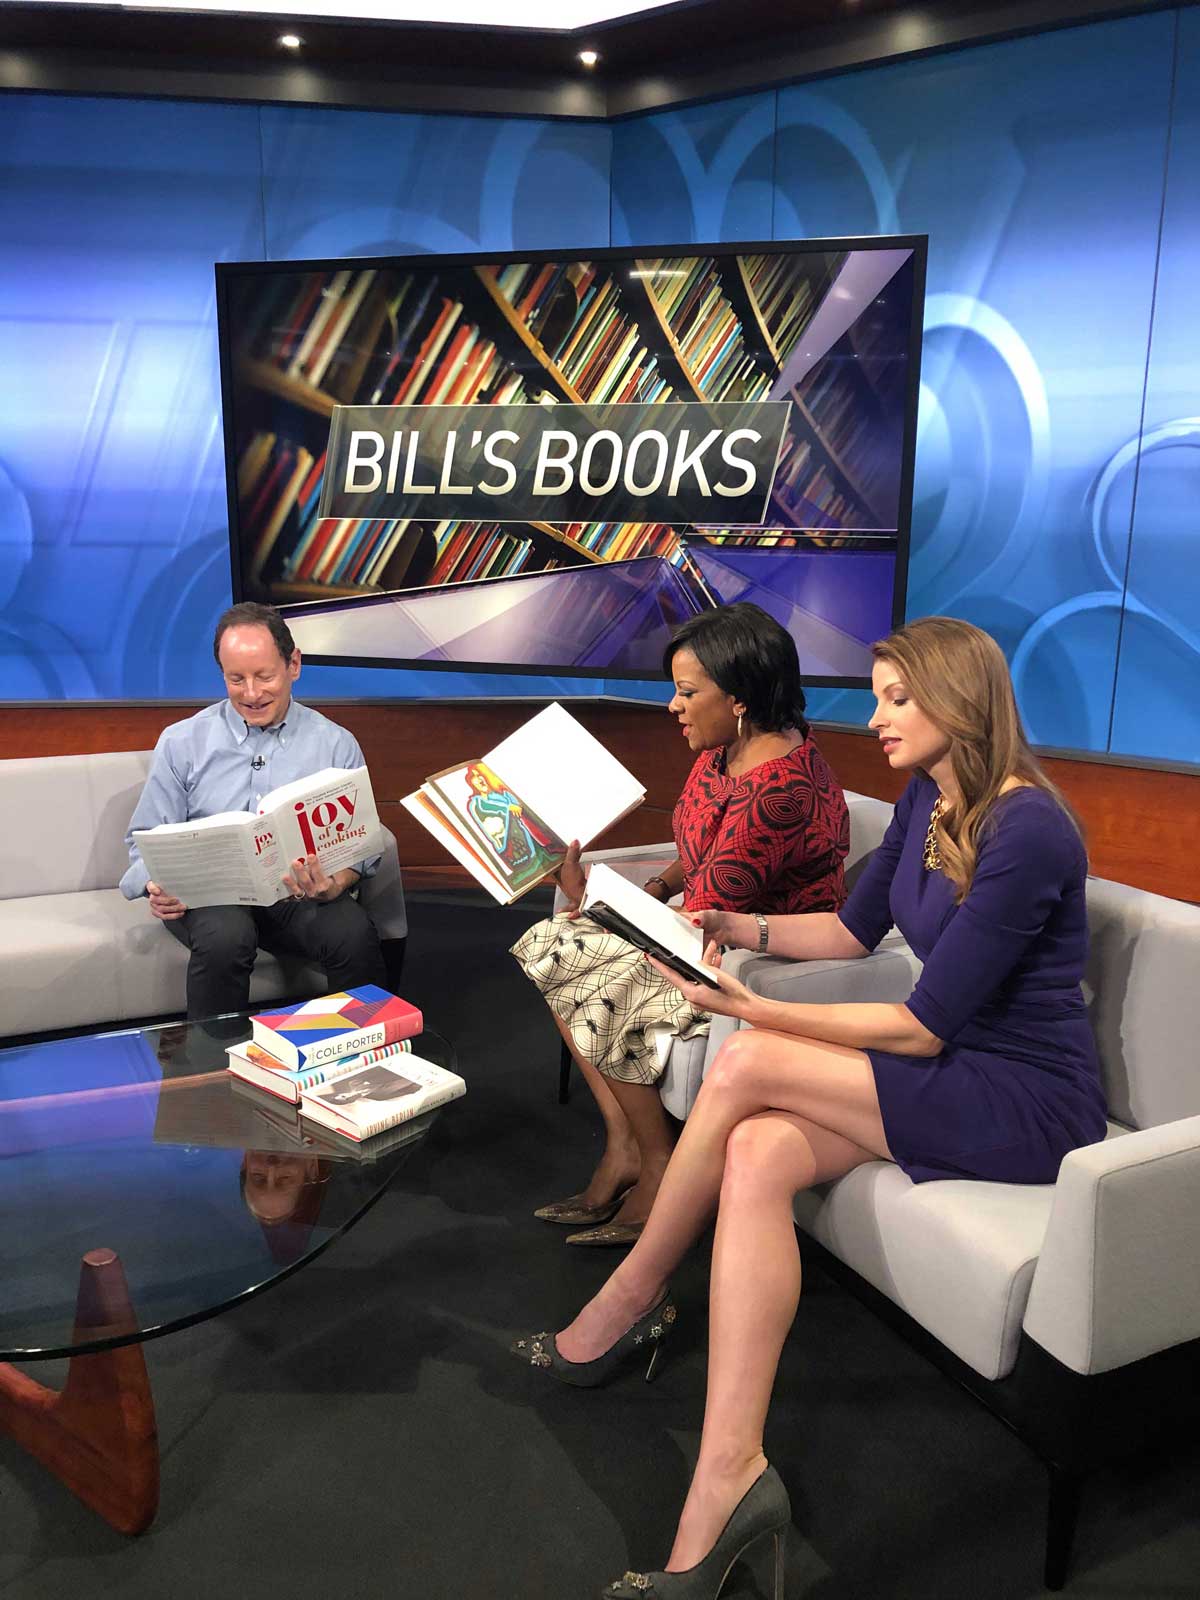 Jen on set with a colleague and a guest, sitting on white sofas reading. The video display behind reads "Bill's Books"